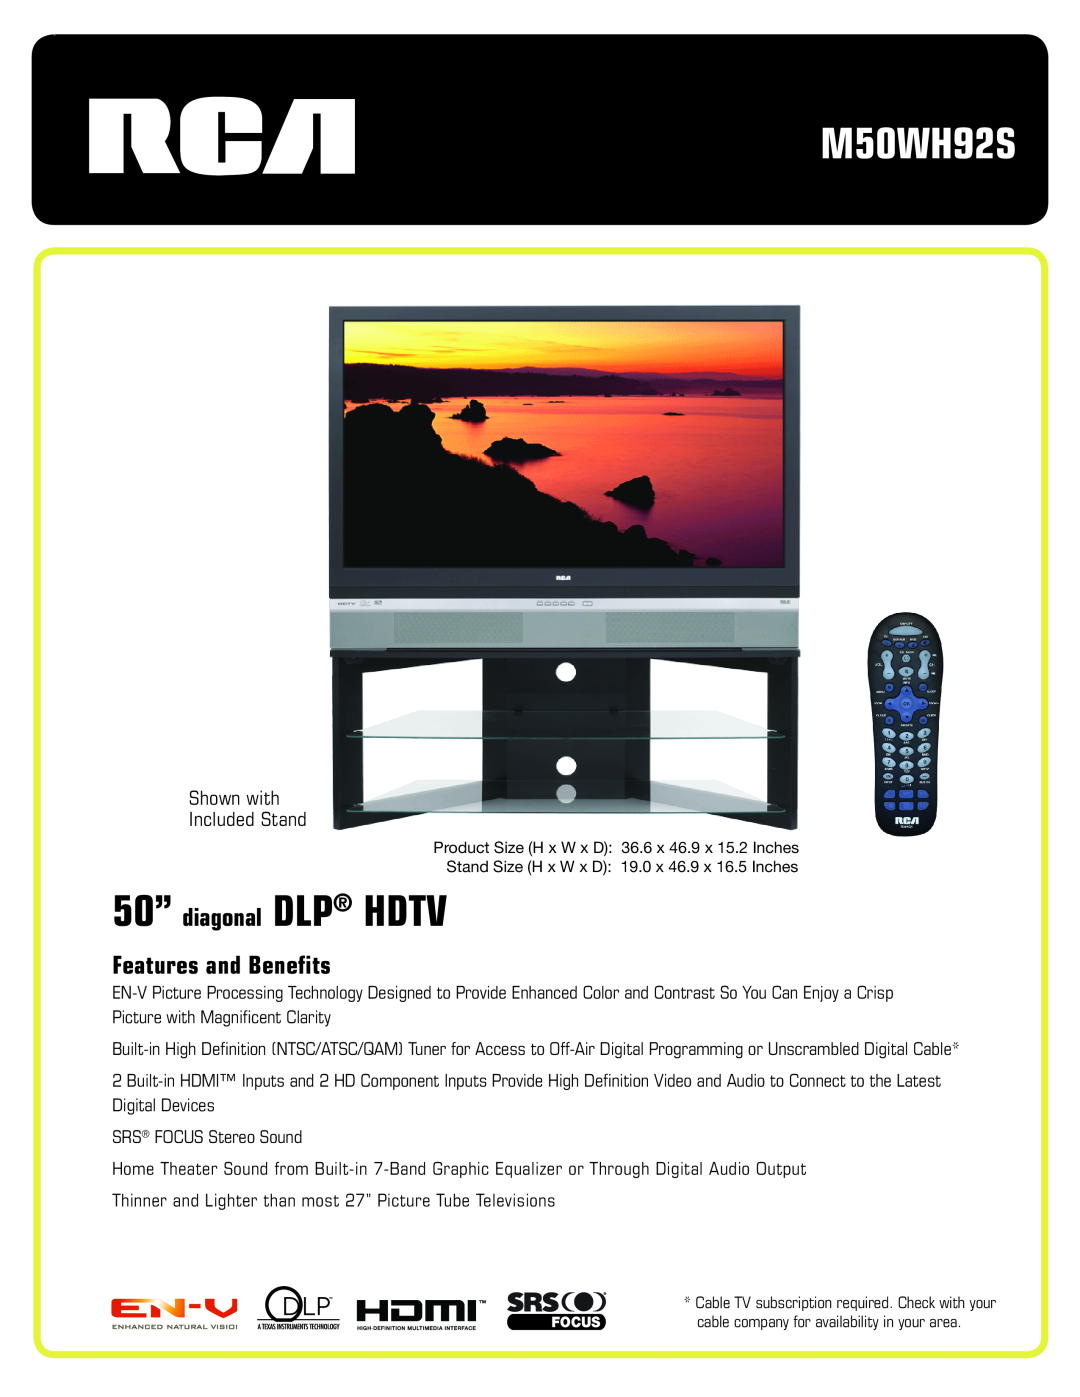 RCA M50WH92S manual 50” diagonal DLP HDTV, Features and Benefits, Shown with Included Stand 